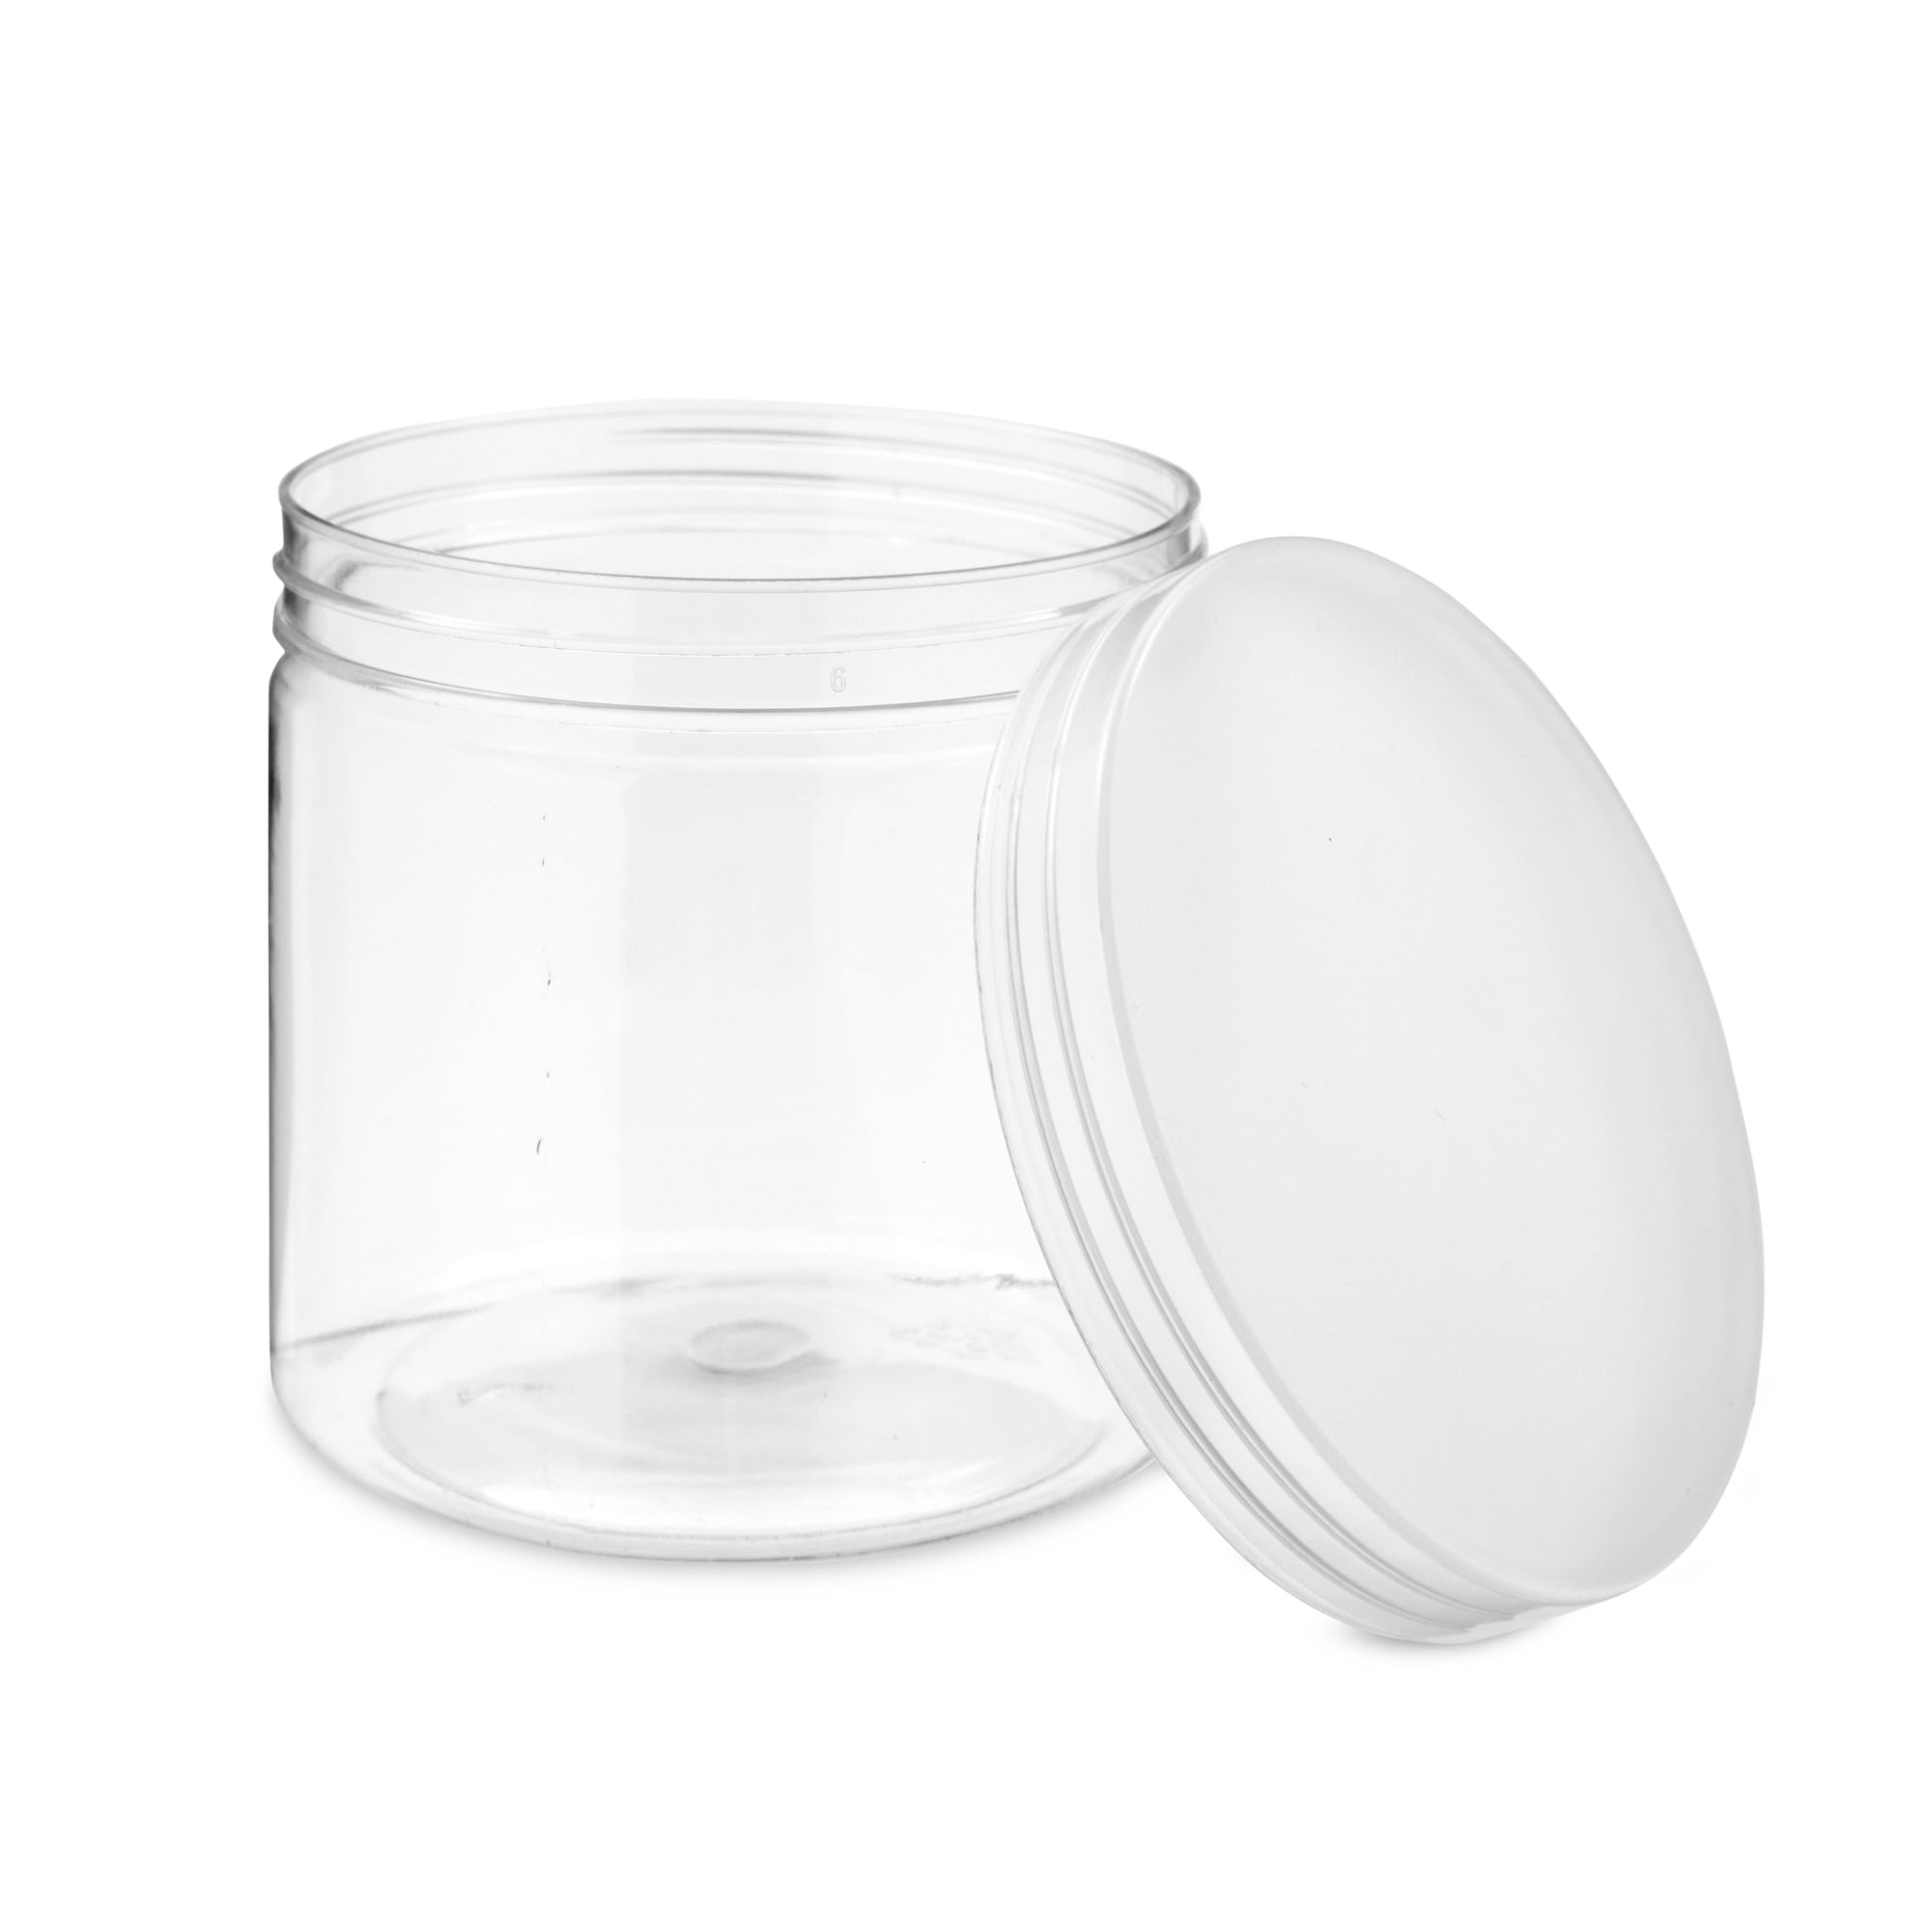 12 Pack Clear Plastic Jars Containers with Screw On Lids,Refillable Wide- Mouth Plastic Slime Storage Containers for Beauty Products,Kitchen &  Household Storage - BPA Free (2.8 Ounce)